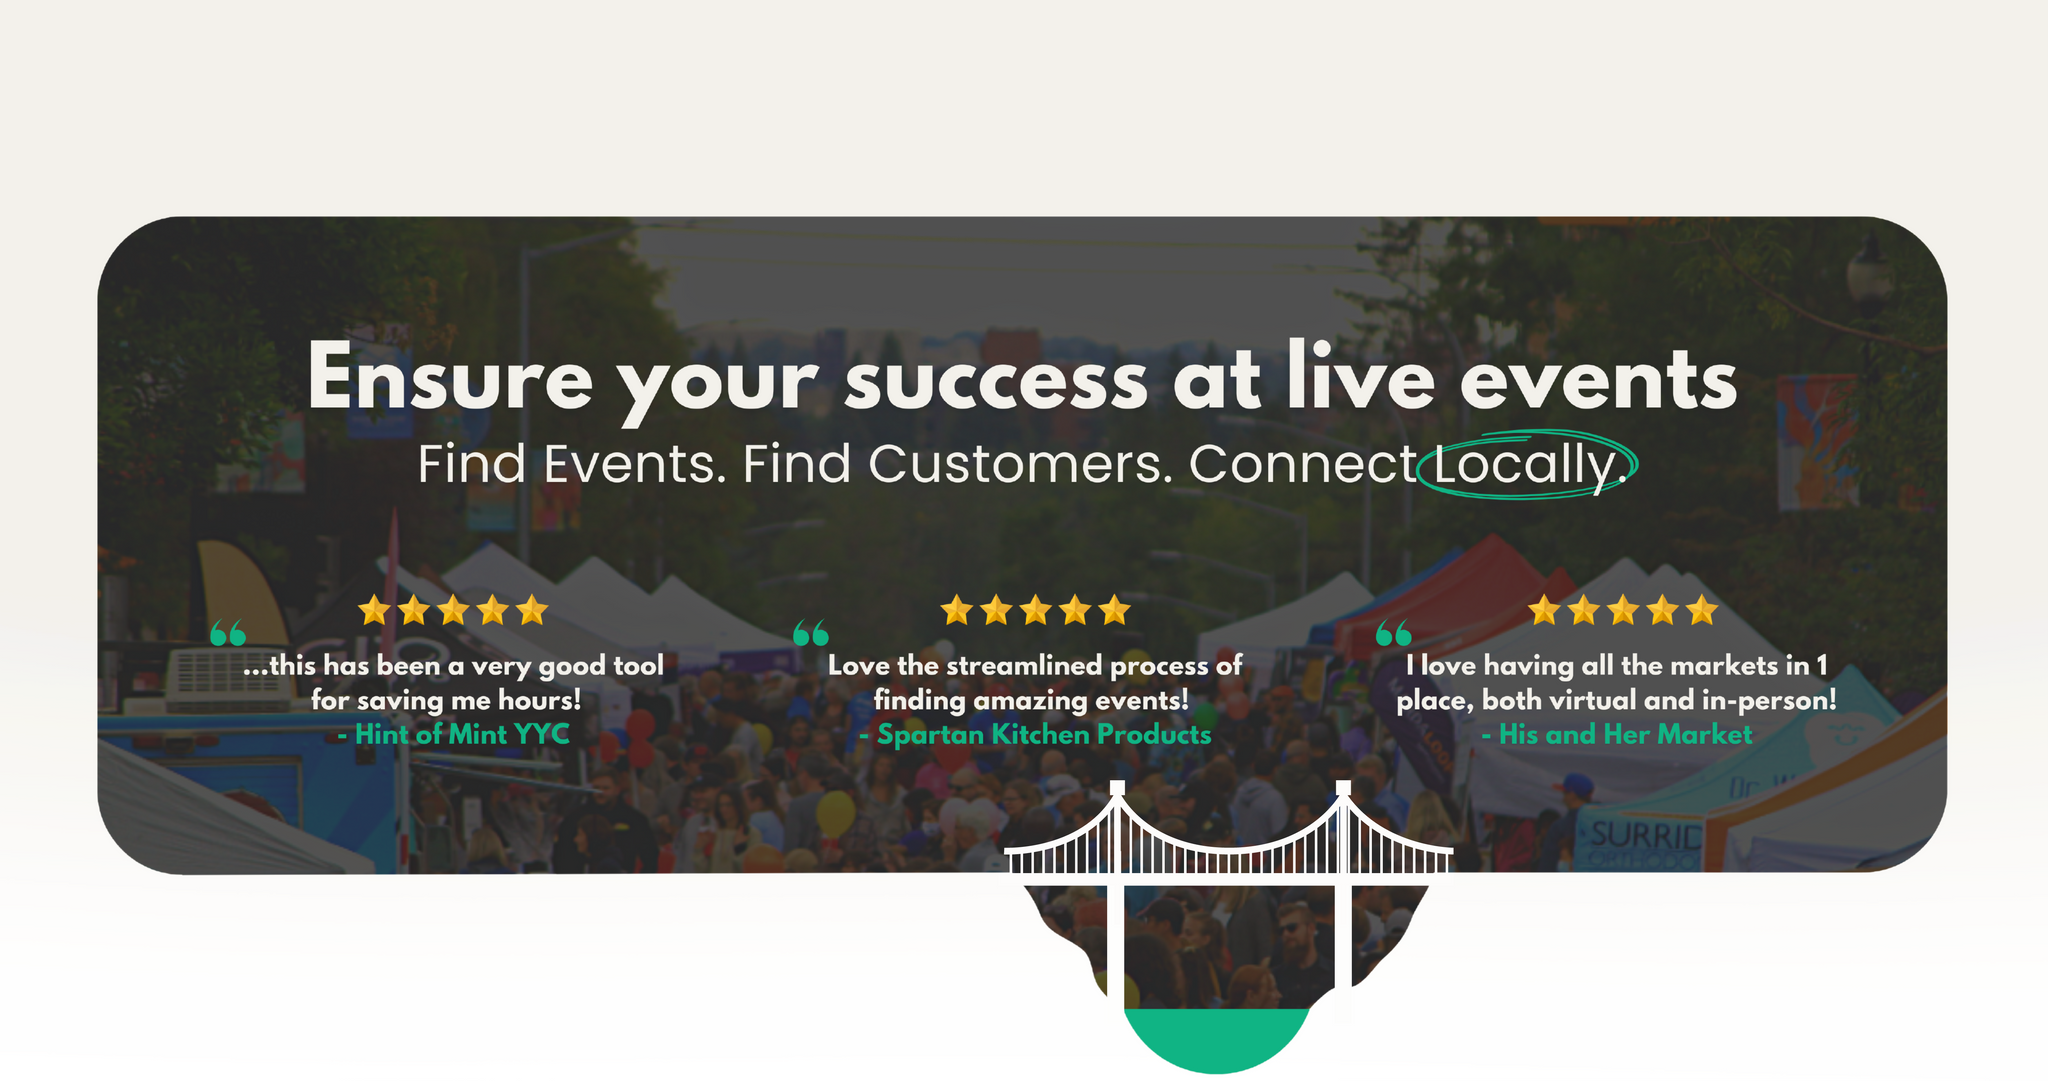 Vendor Bridge help vendors connect with event organizers and find available booth spaces at live events. 